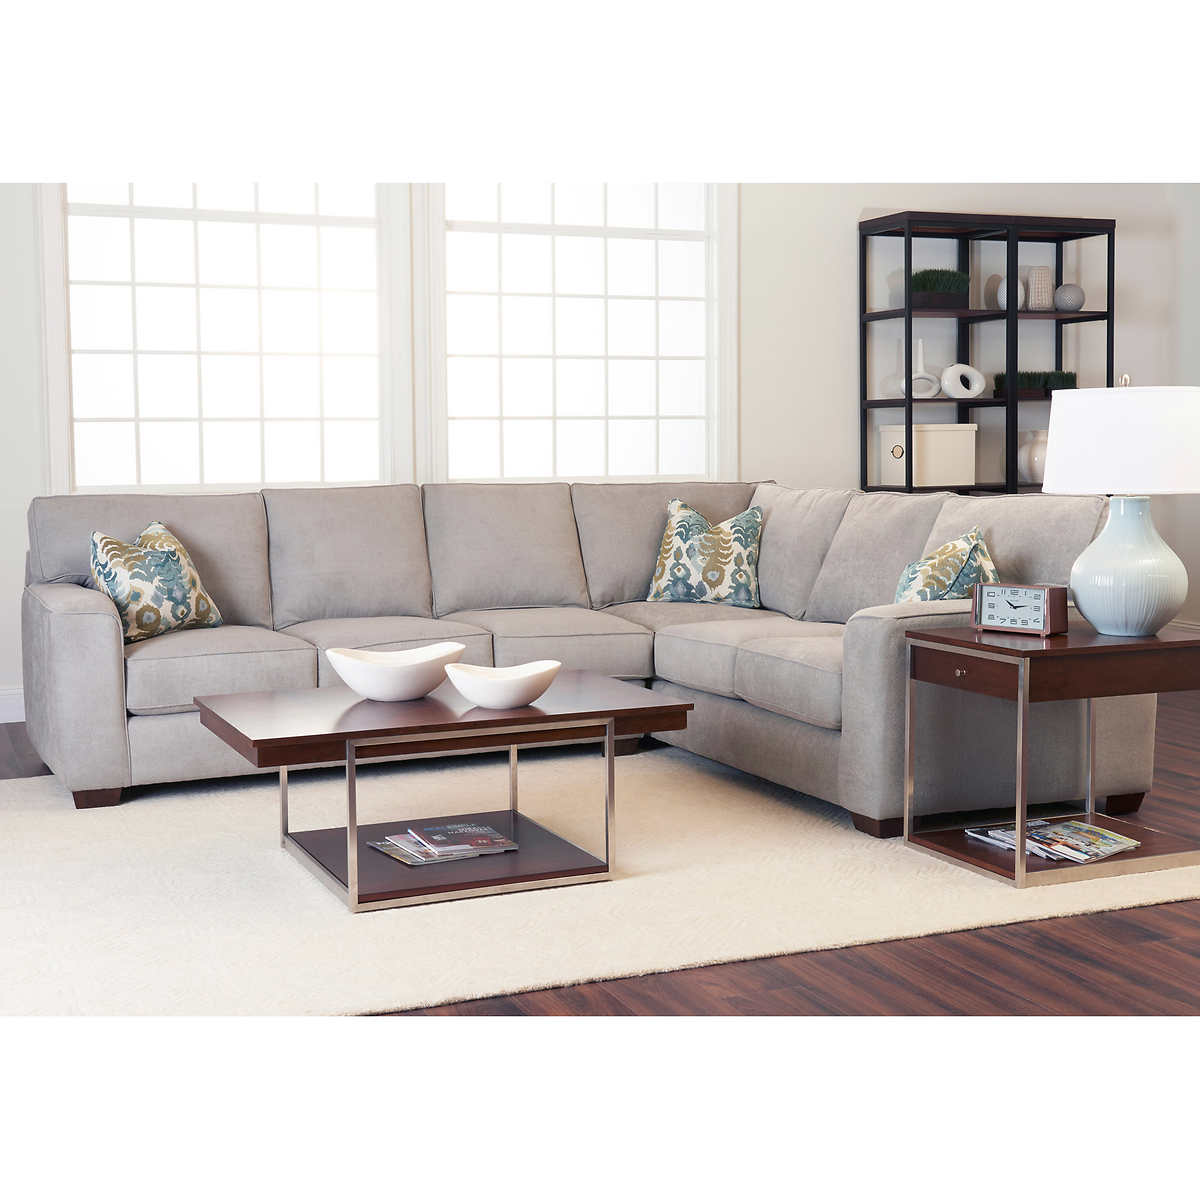 Value City Furniture Fireplace New Abbott 2 Piece Fabric Sectional